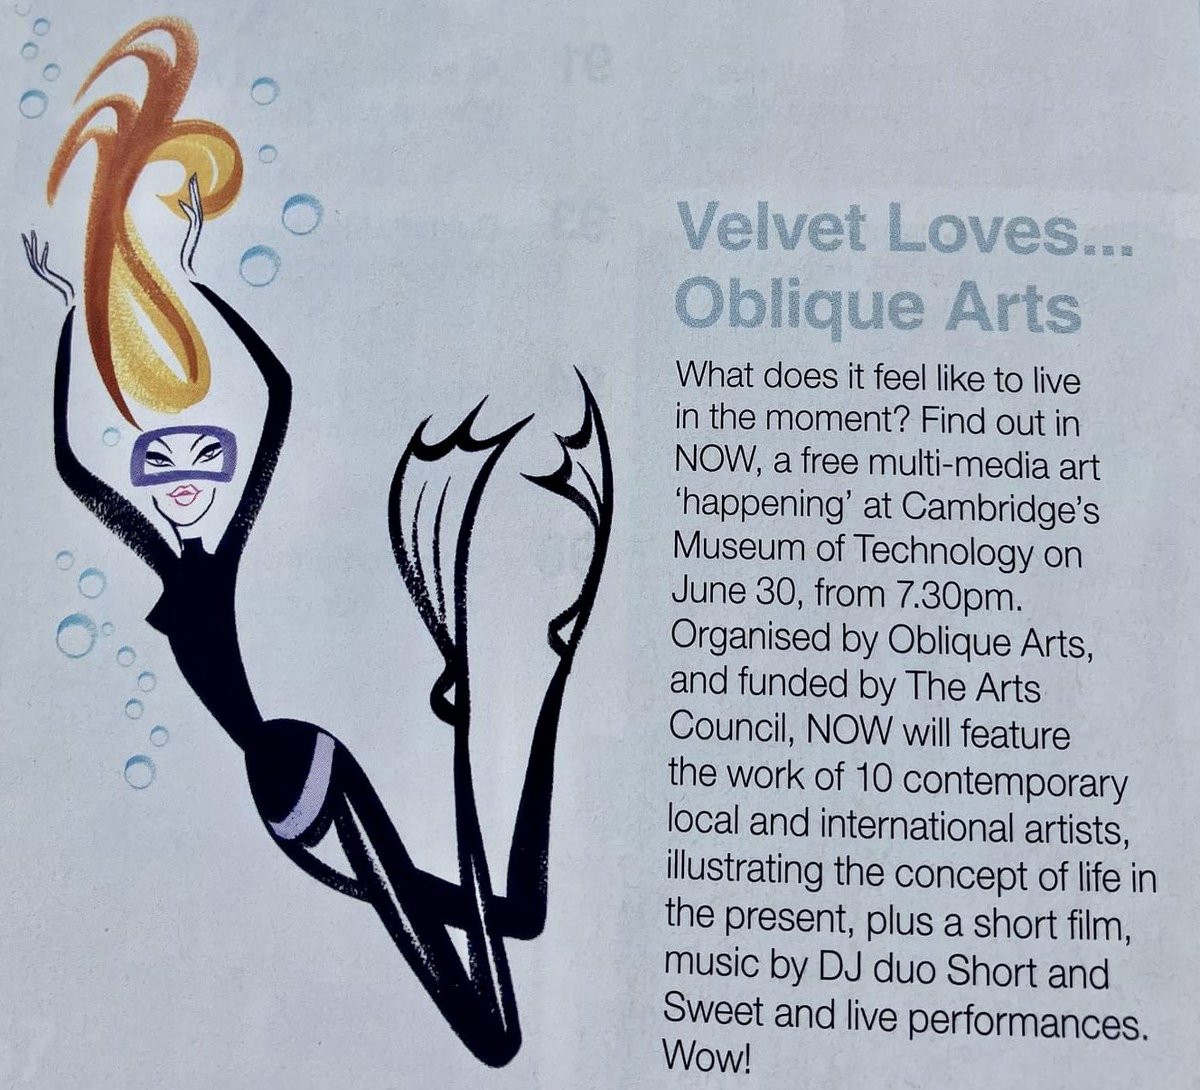 Looking forward to seeing my art in the @Obliquearts2001 #thenowshow at @CamTechMuseum this Friday evening, an #arthappening of #modernart Looking forward to seeing films by @oculardelusion Thanks to @velvetmag for including my artwork in their mag! @camcitco @ace_national